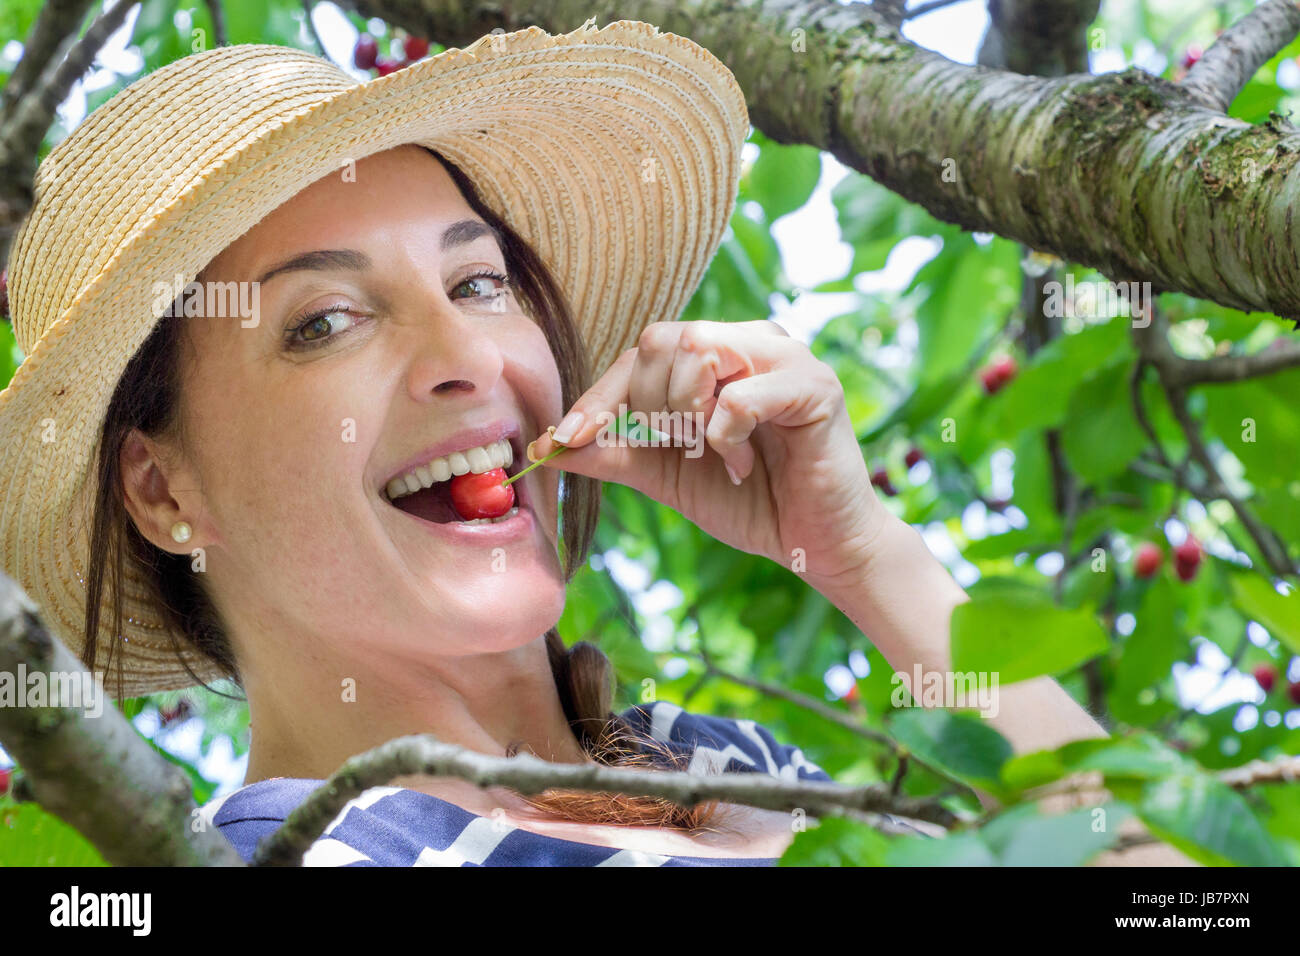 A woman wearing a hat on a tree biting a cherry looking at camera, smiling. Stock Photo